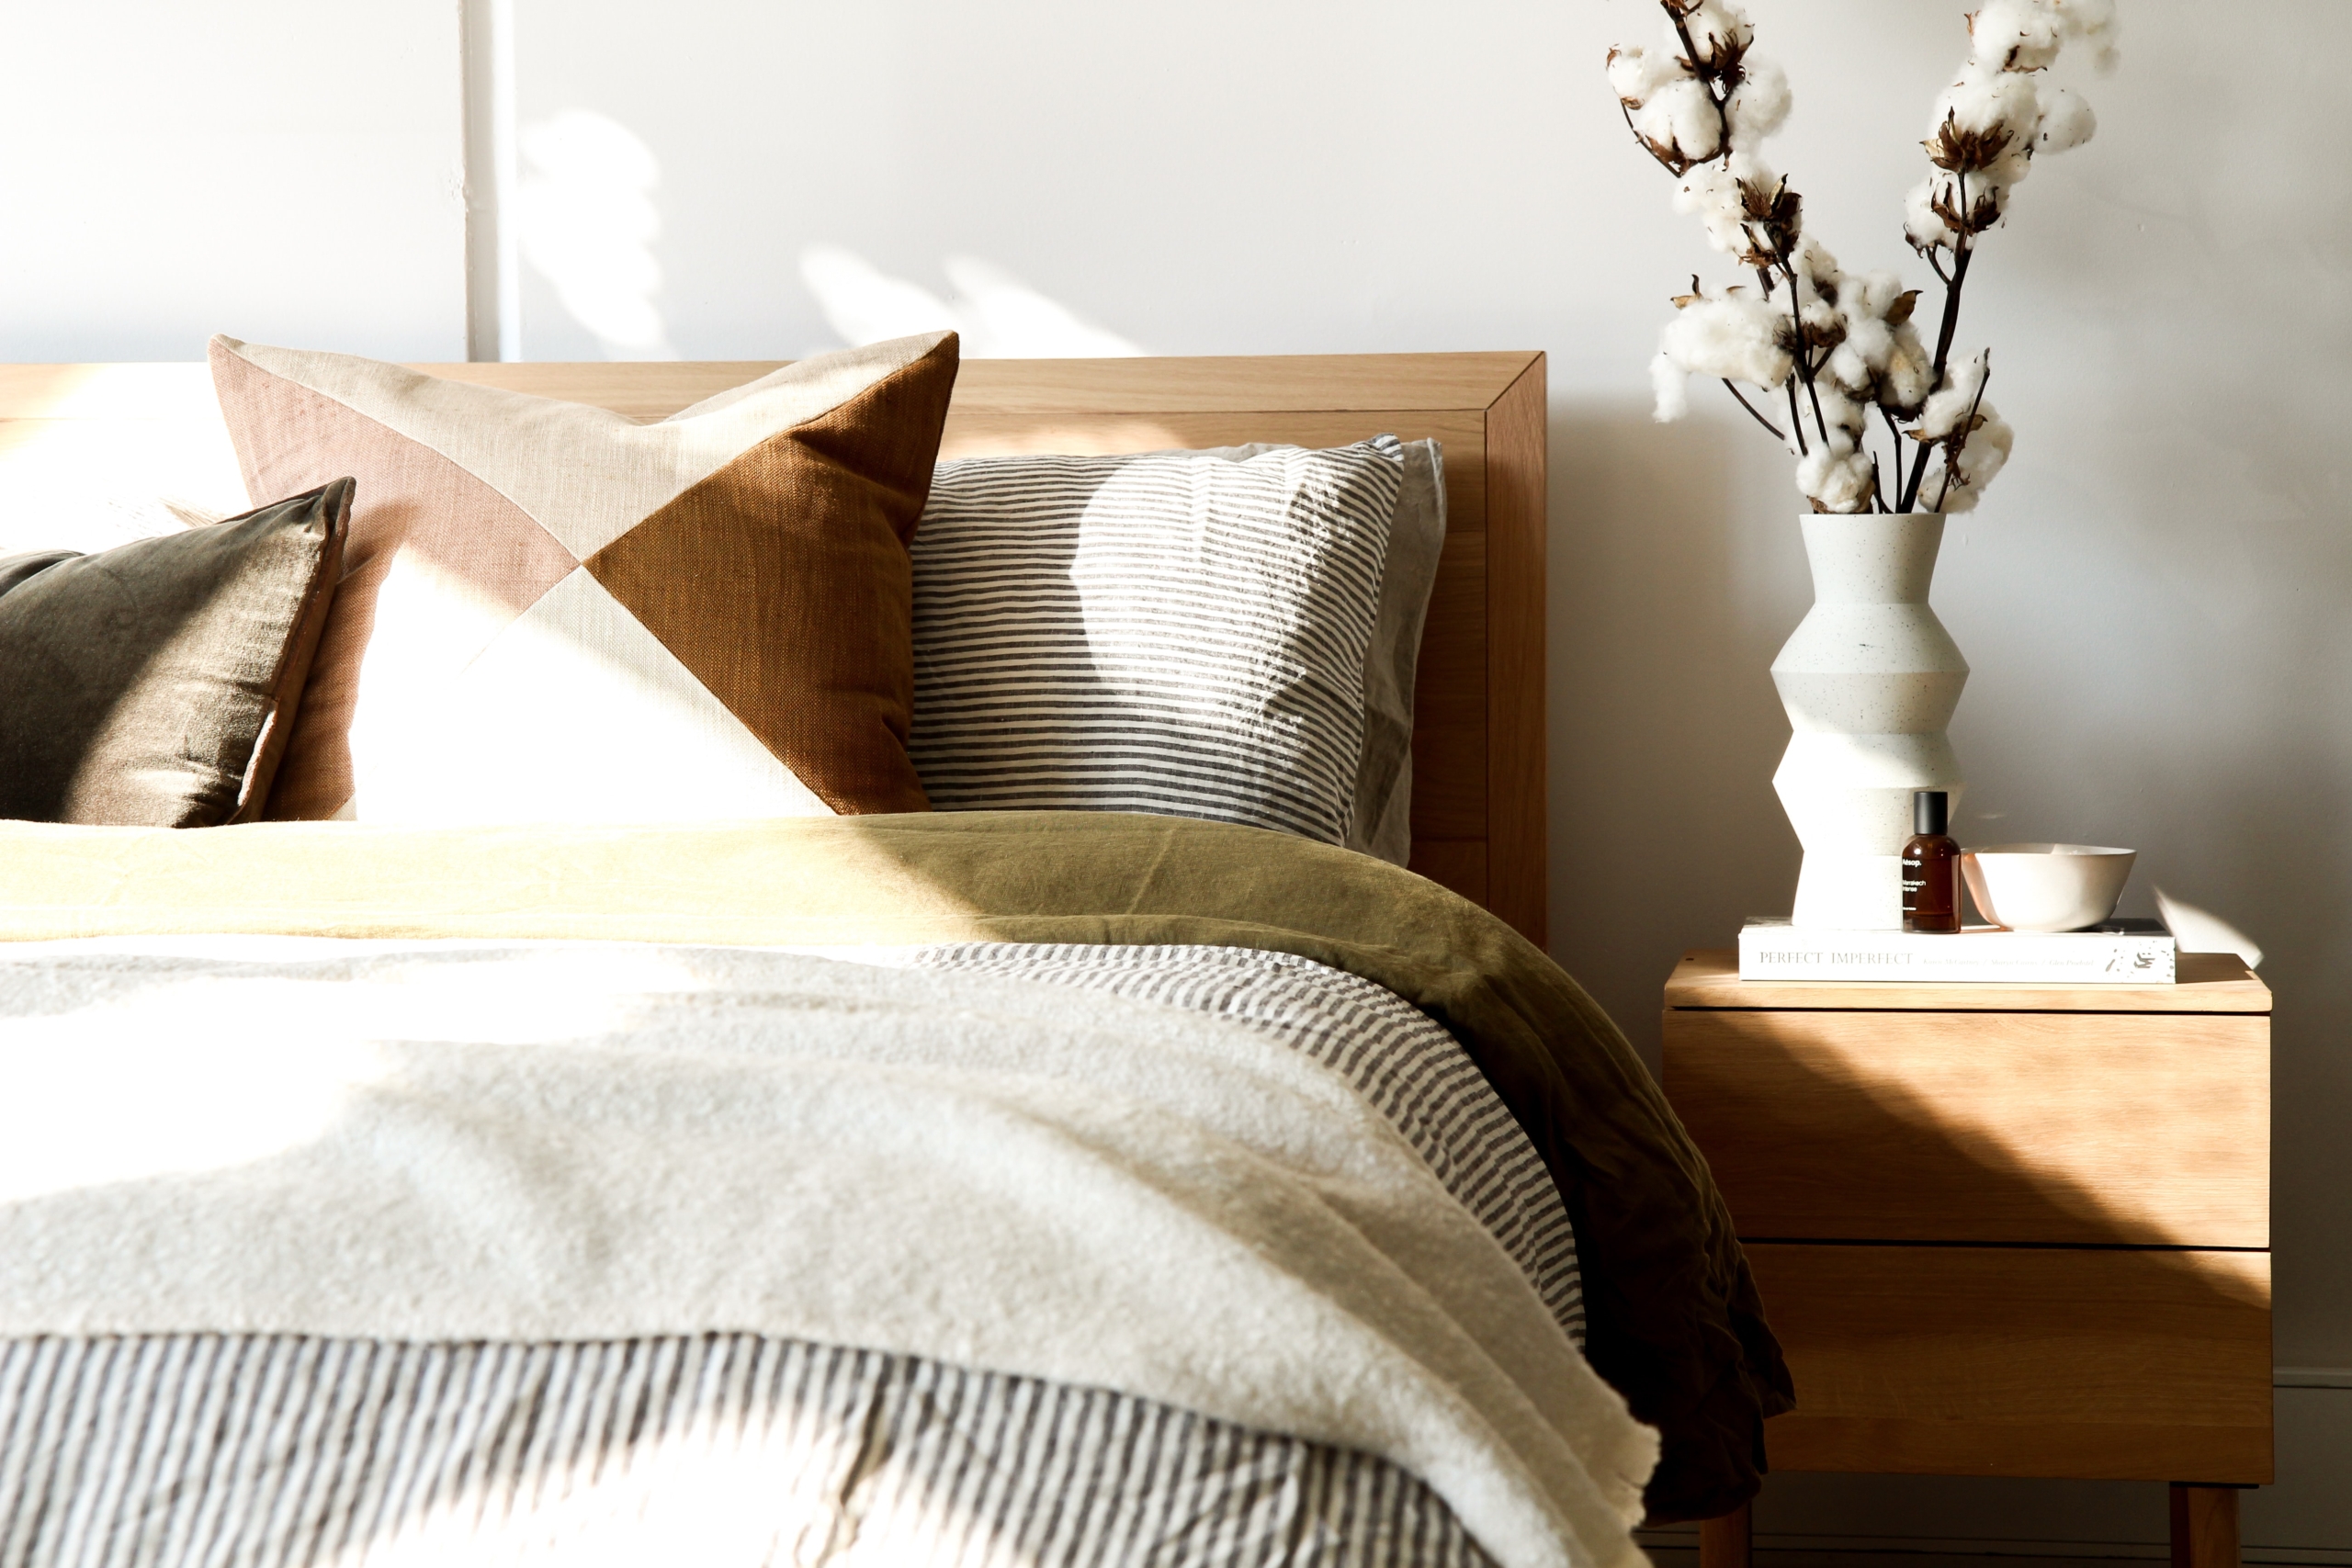 13 Tricks That Will Make Your Bedroom Look Classy and Sophisticated